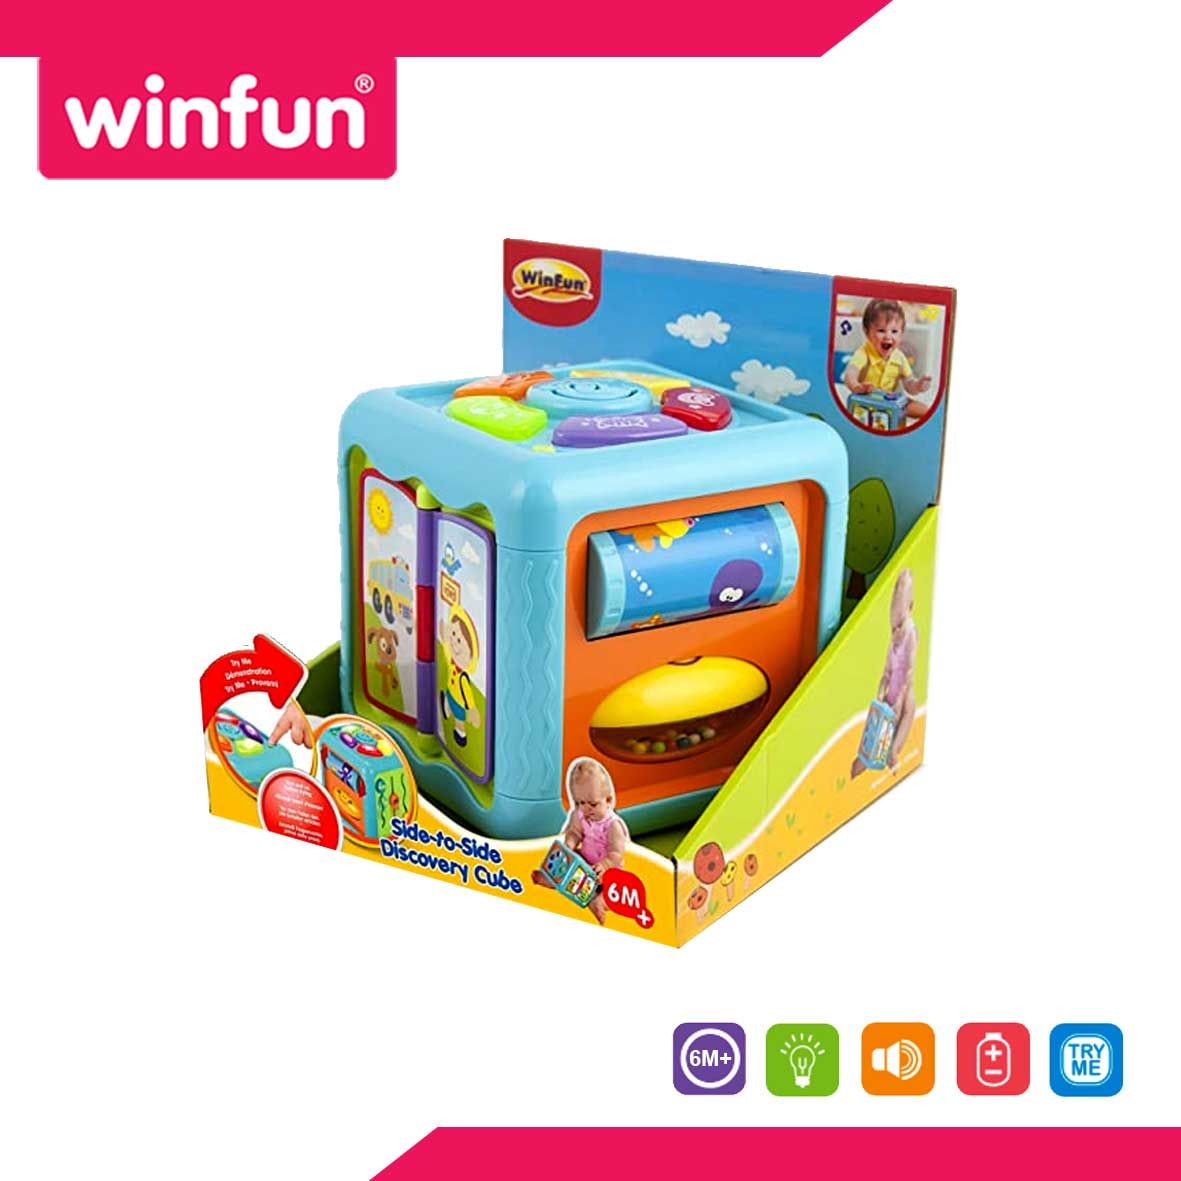 Winfun Side-to-Side Discovery Cube - 1